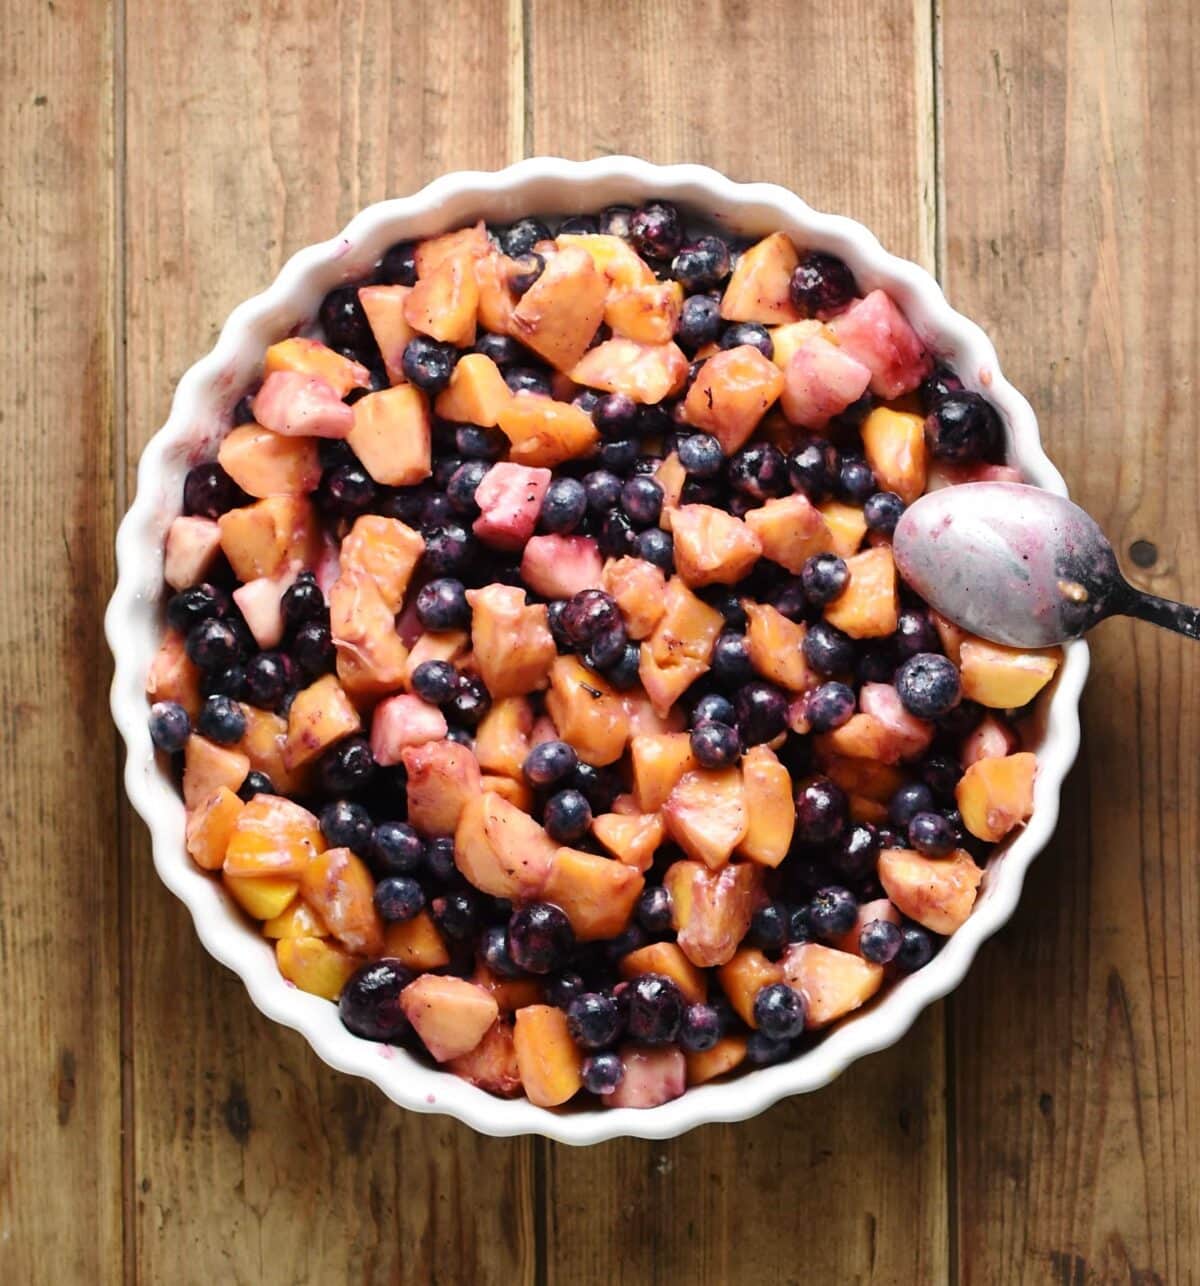 Top down view of cubed peaches and blueberries inside white round dish with spoon to the right.